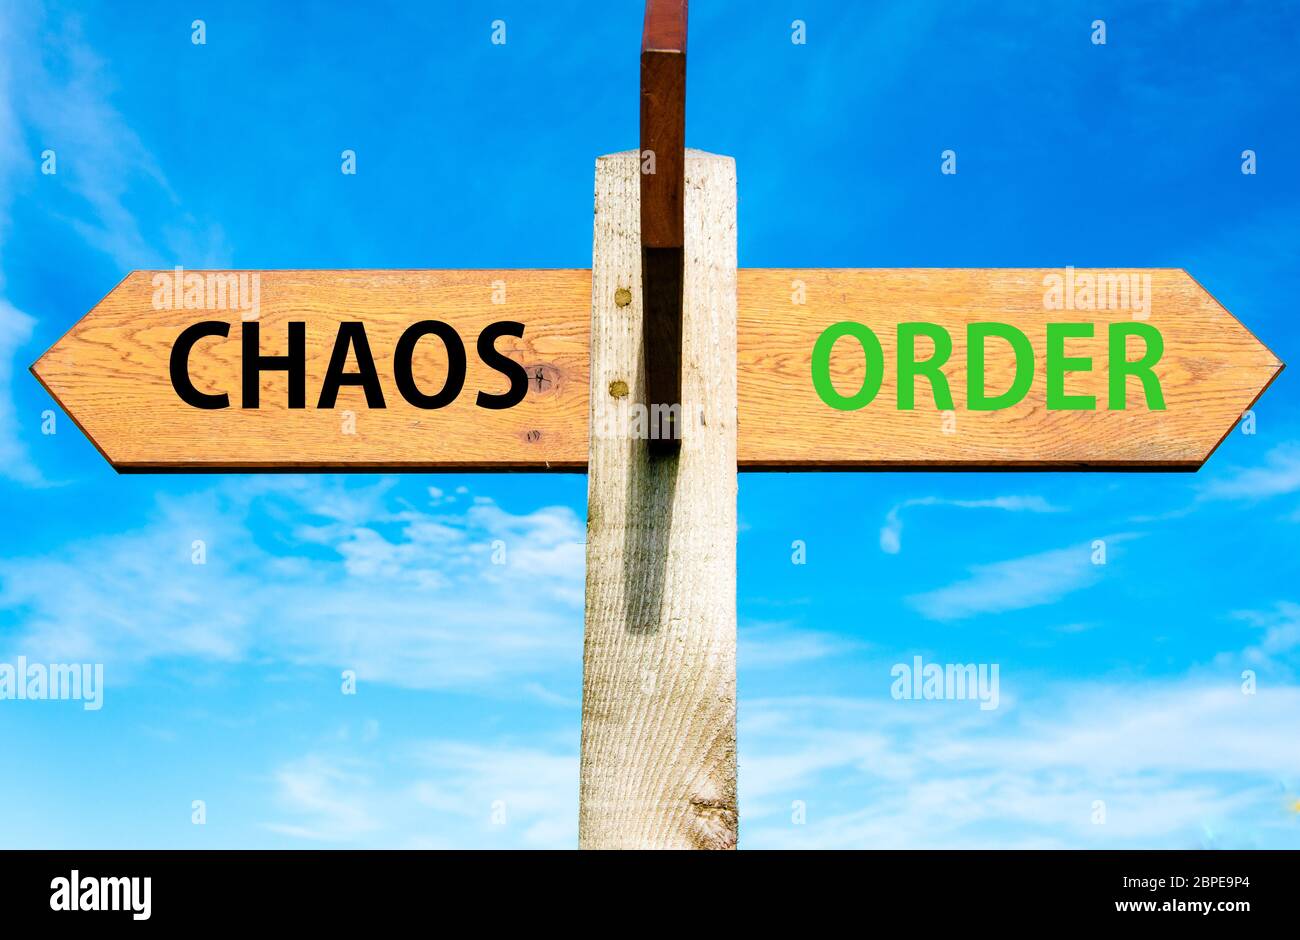 Wooden signpost with two opposite arrows over clear blue sky, Chaos versus Order messages Stock Photo